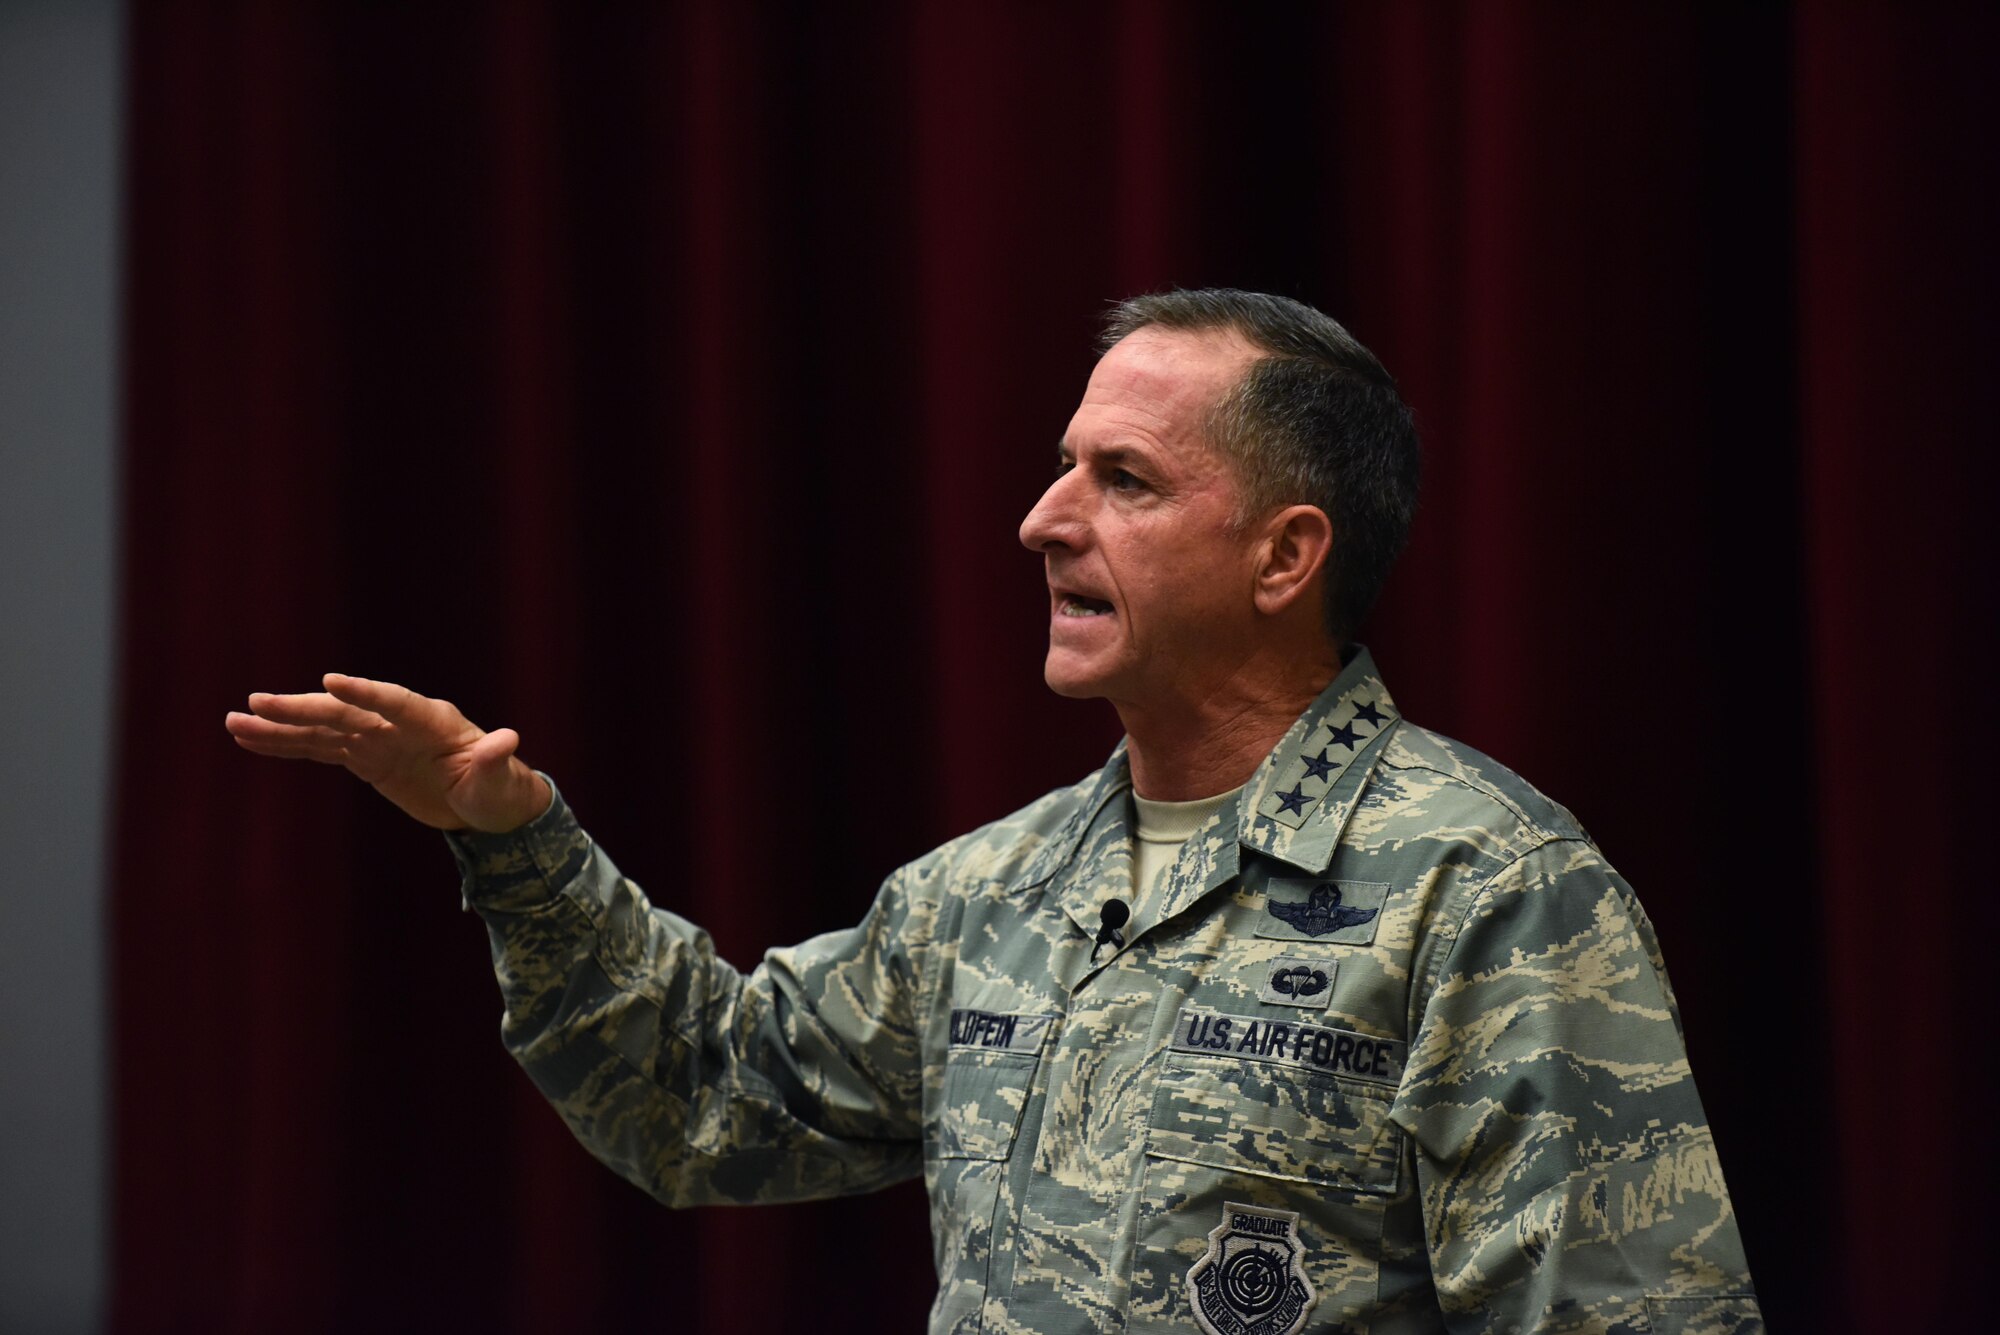 Air Force Chief of Staff Gen. David L. Goldfein speaks to Airmen at Maxwell Air Force Base, Ala., during a town hall event July 20, 2016. This is the first town hall Goldfein has hosted since being sworn in as the chief of staff. (U.S. Air Force photo/Senior Airman Hailey Haux)